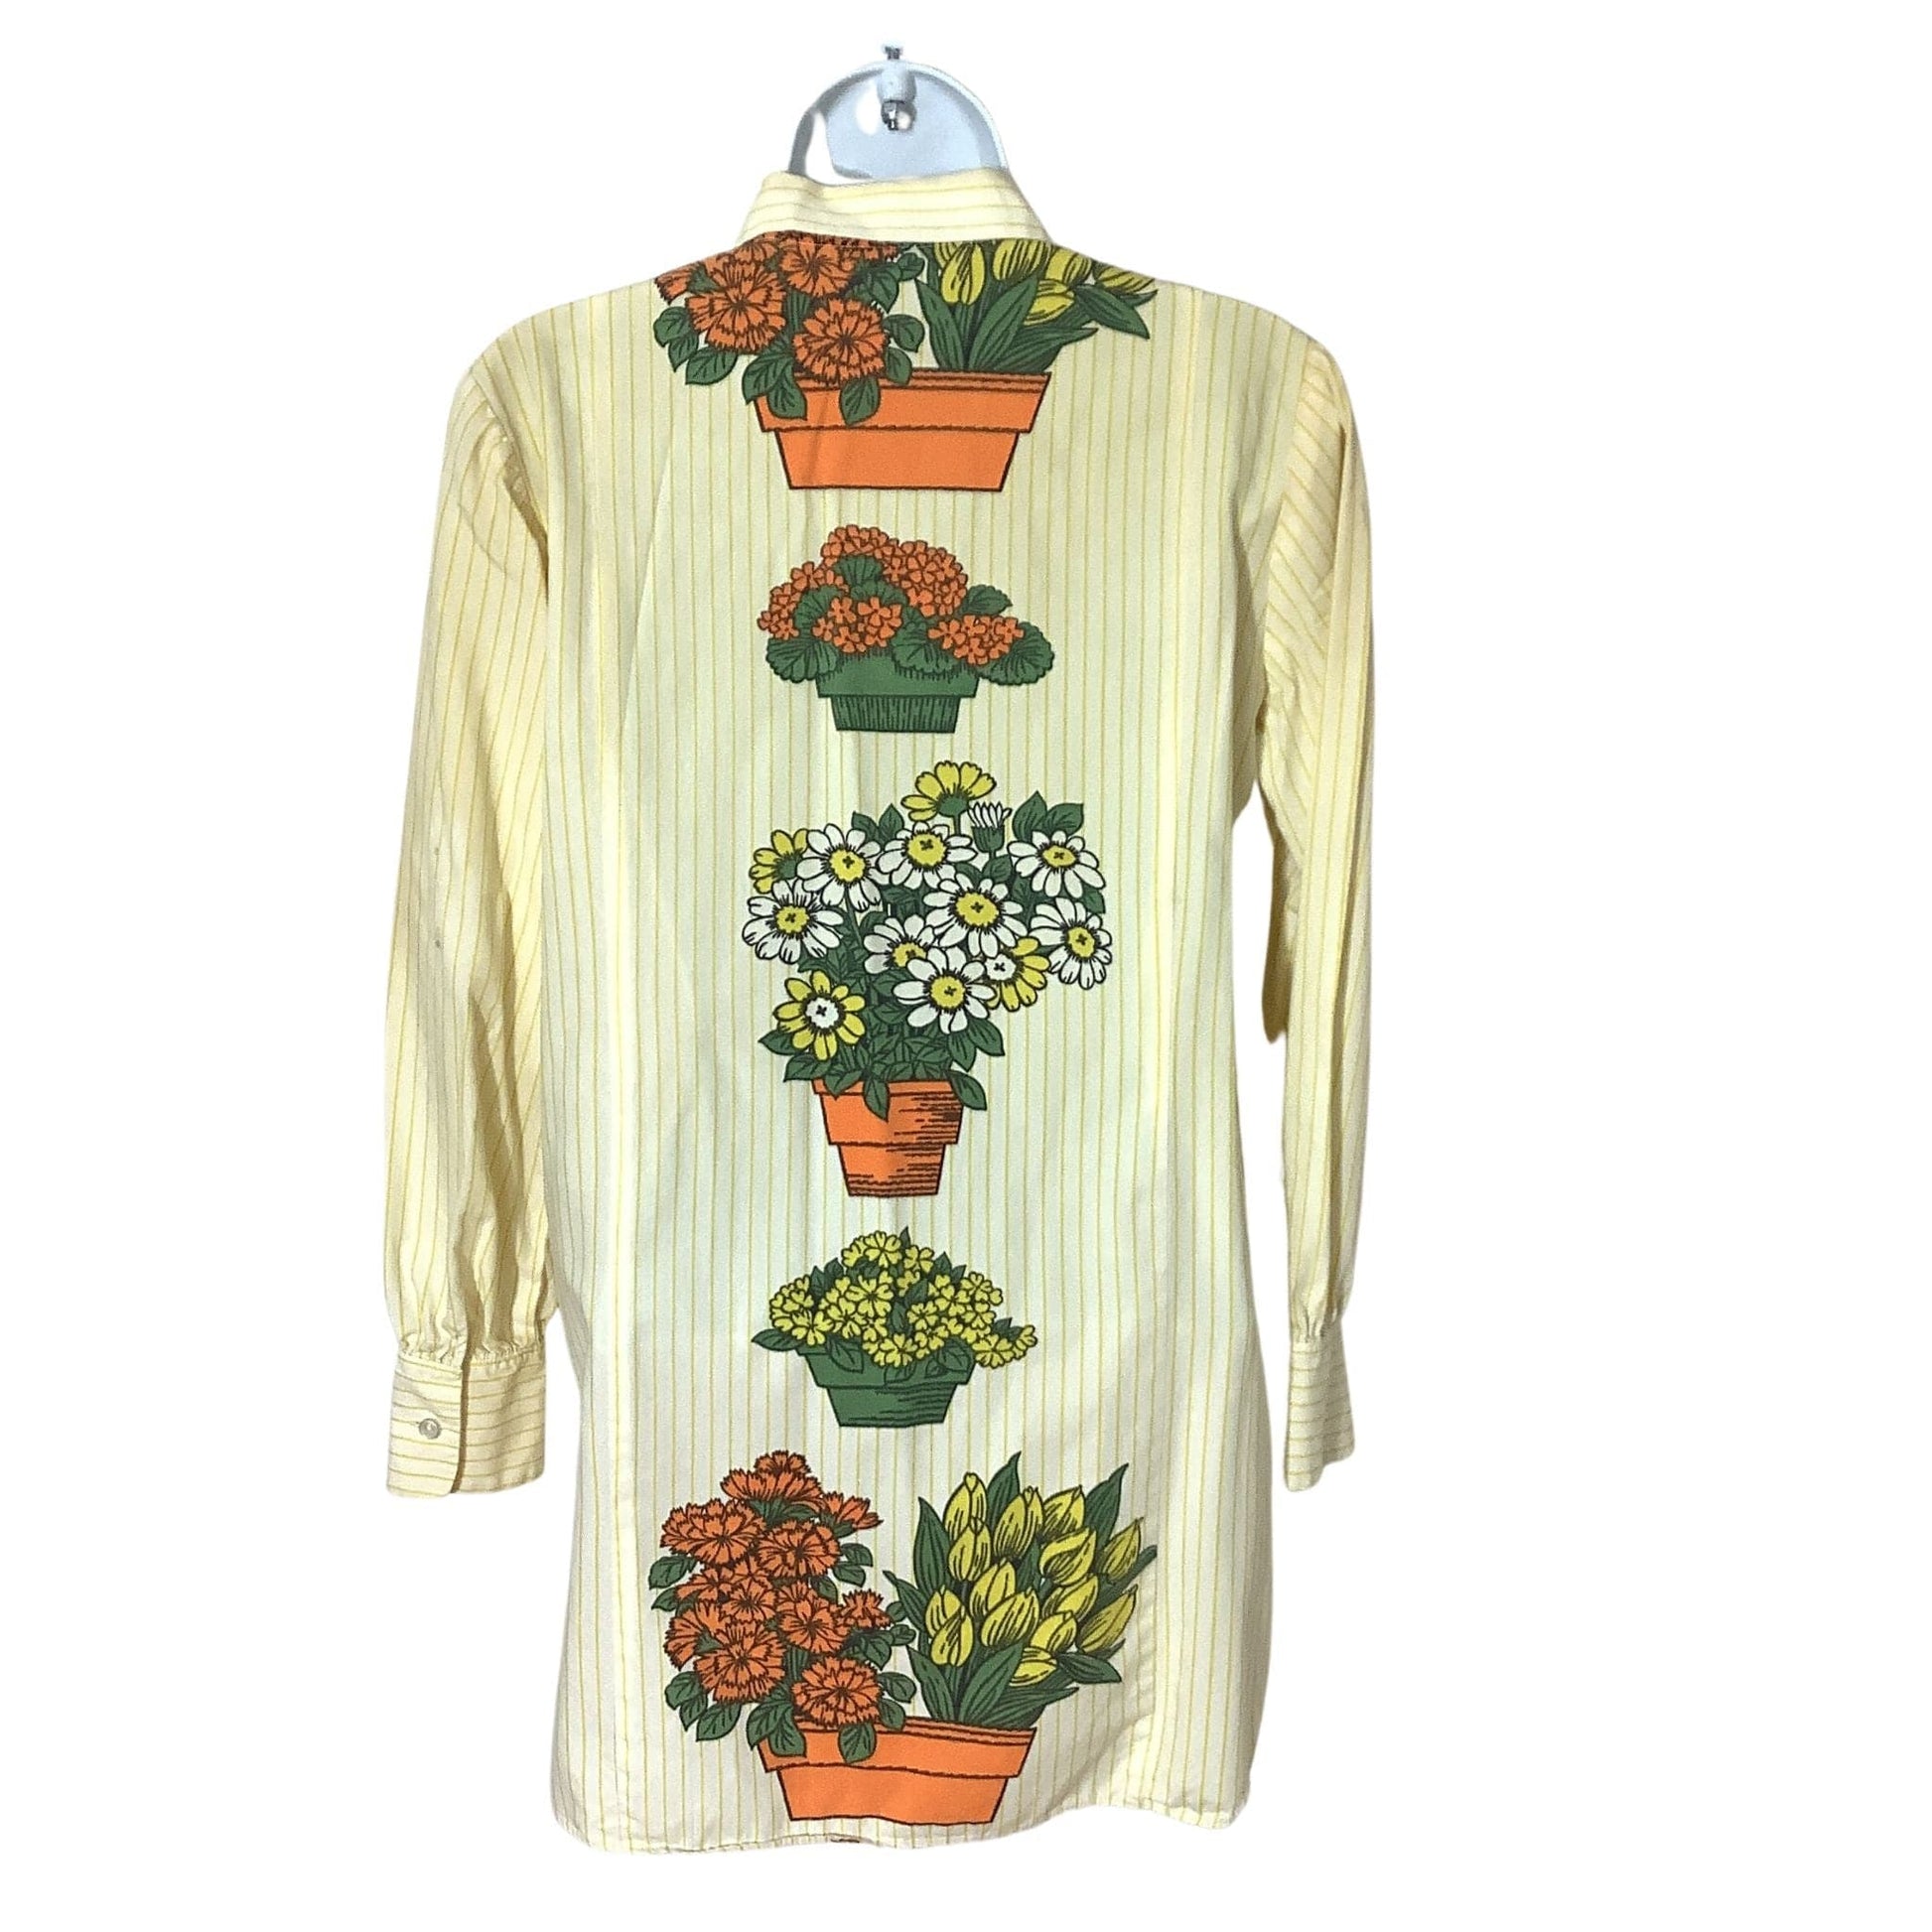 1930s Gardening Blouse Small / Multi / Vintage 1930s